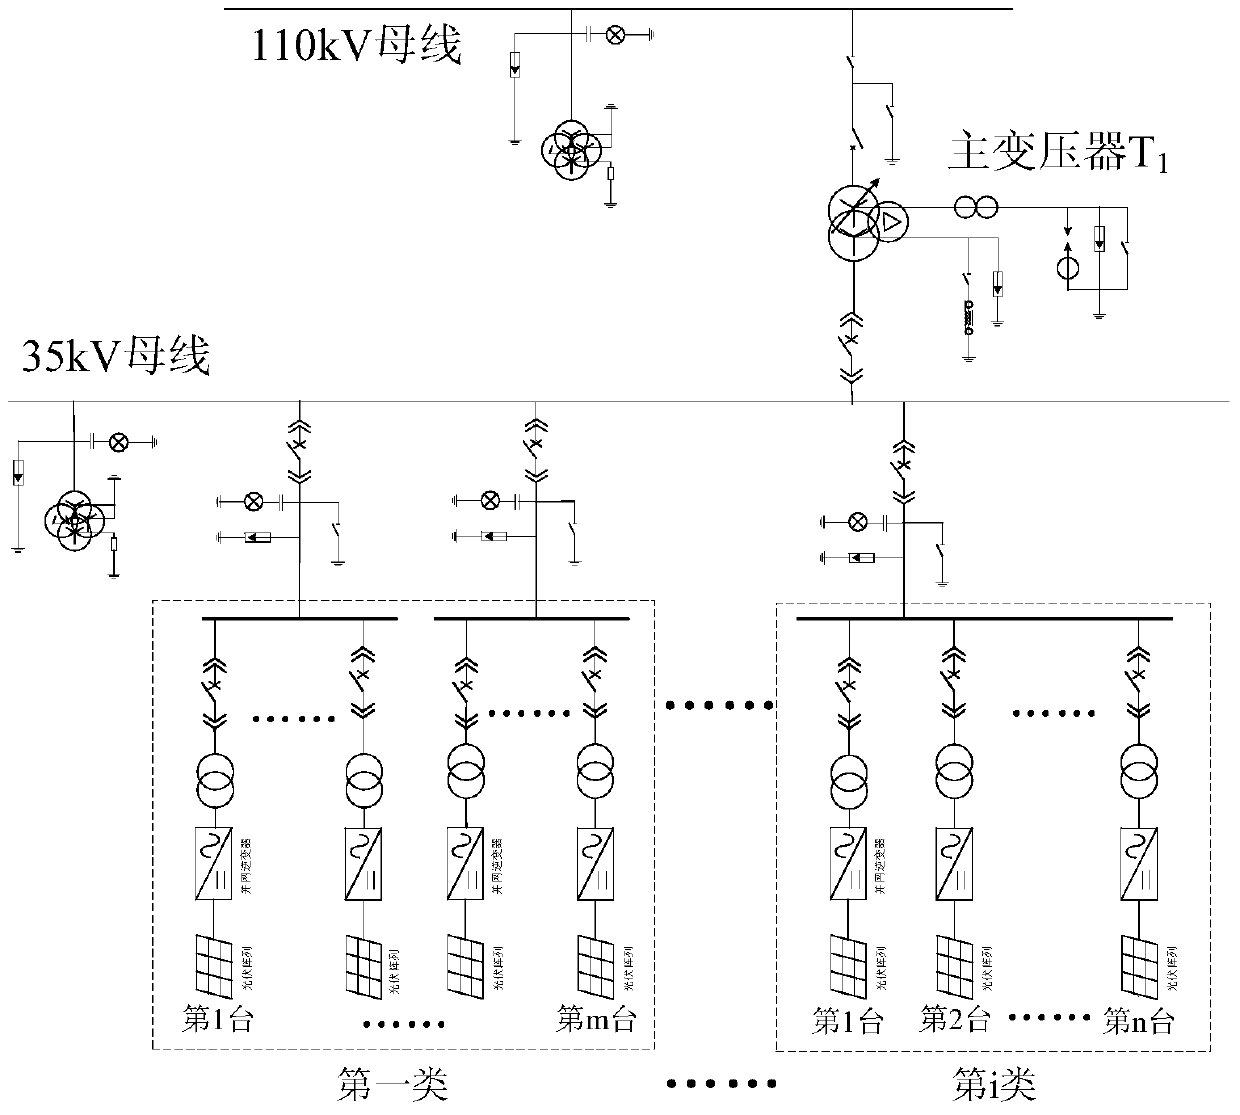 A Method for Evaluation of Low Voltage Ride Through Capability of Photovoltaic Power Plant